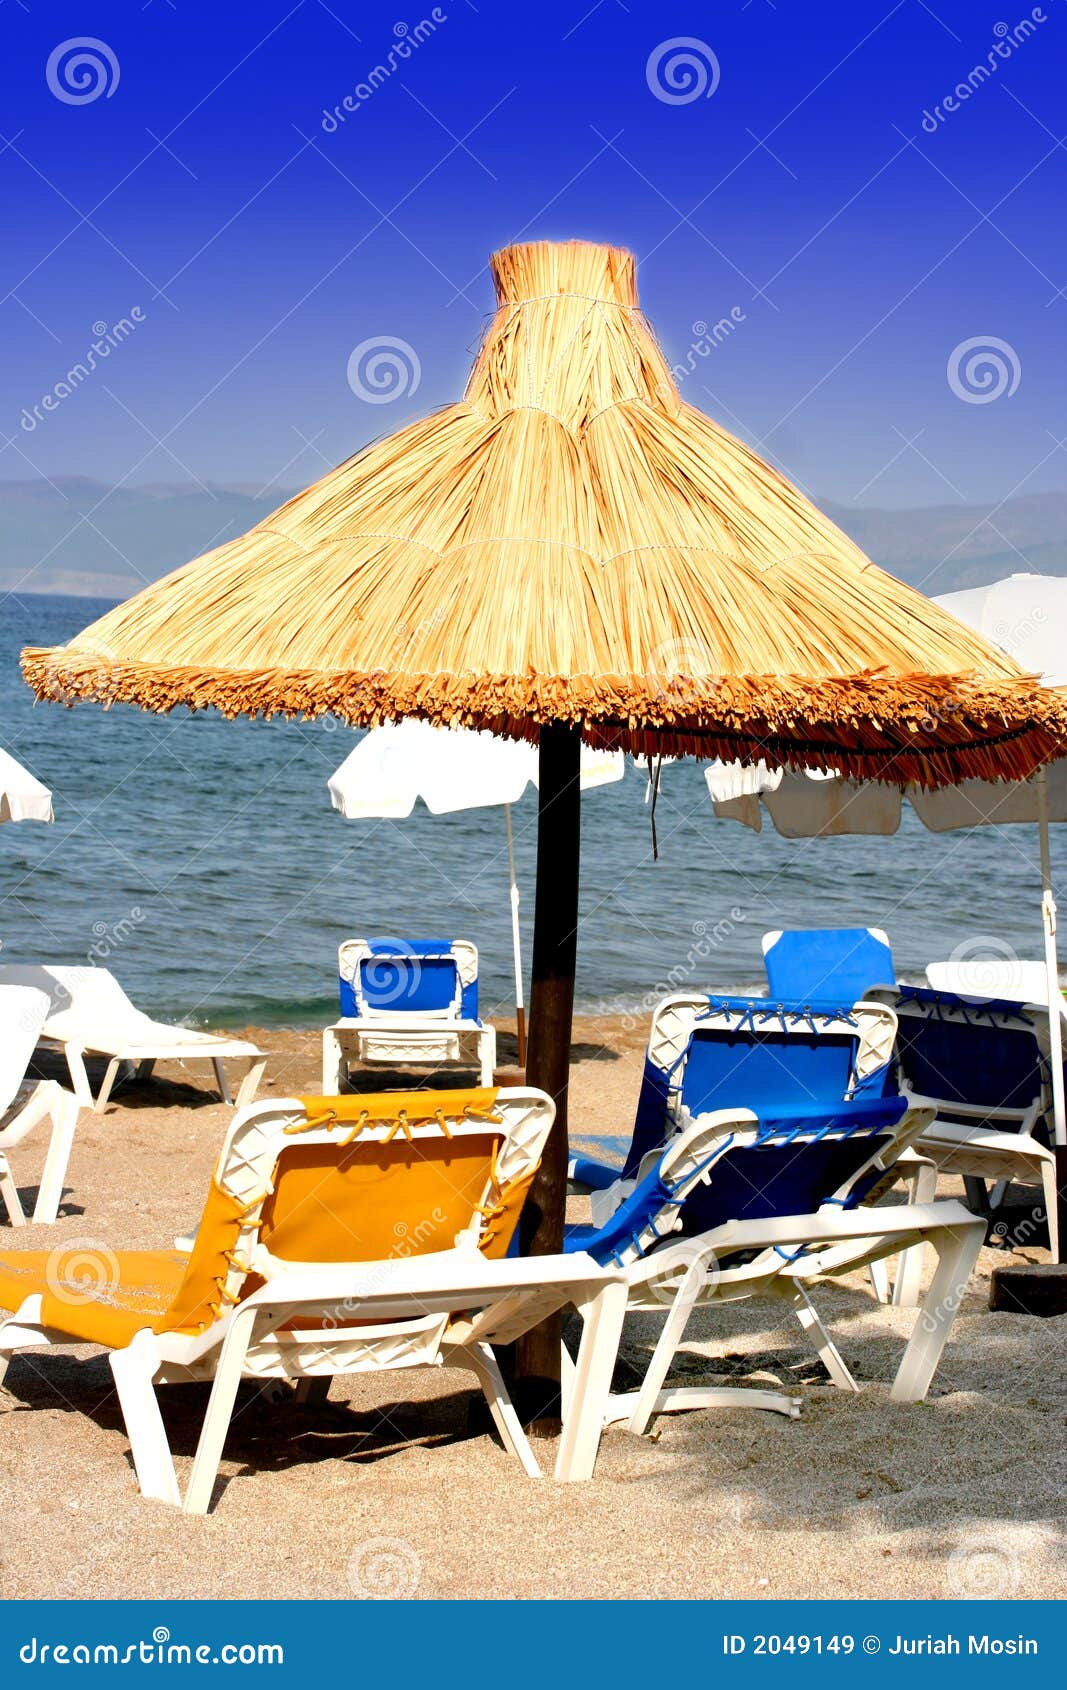 Sun Loungers by the Beach on a Mediterranean Coast Stock Image - Image ...